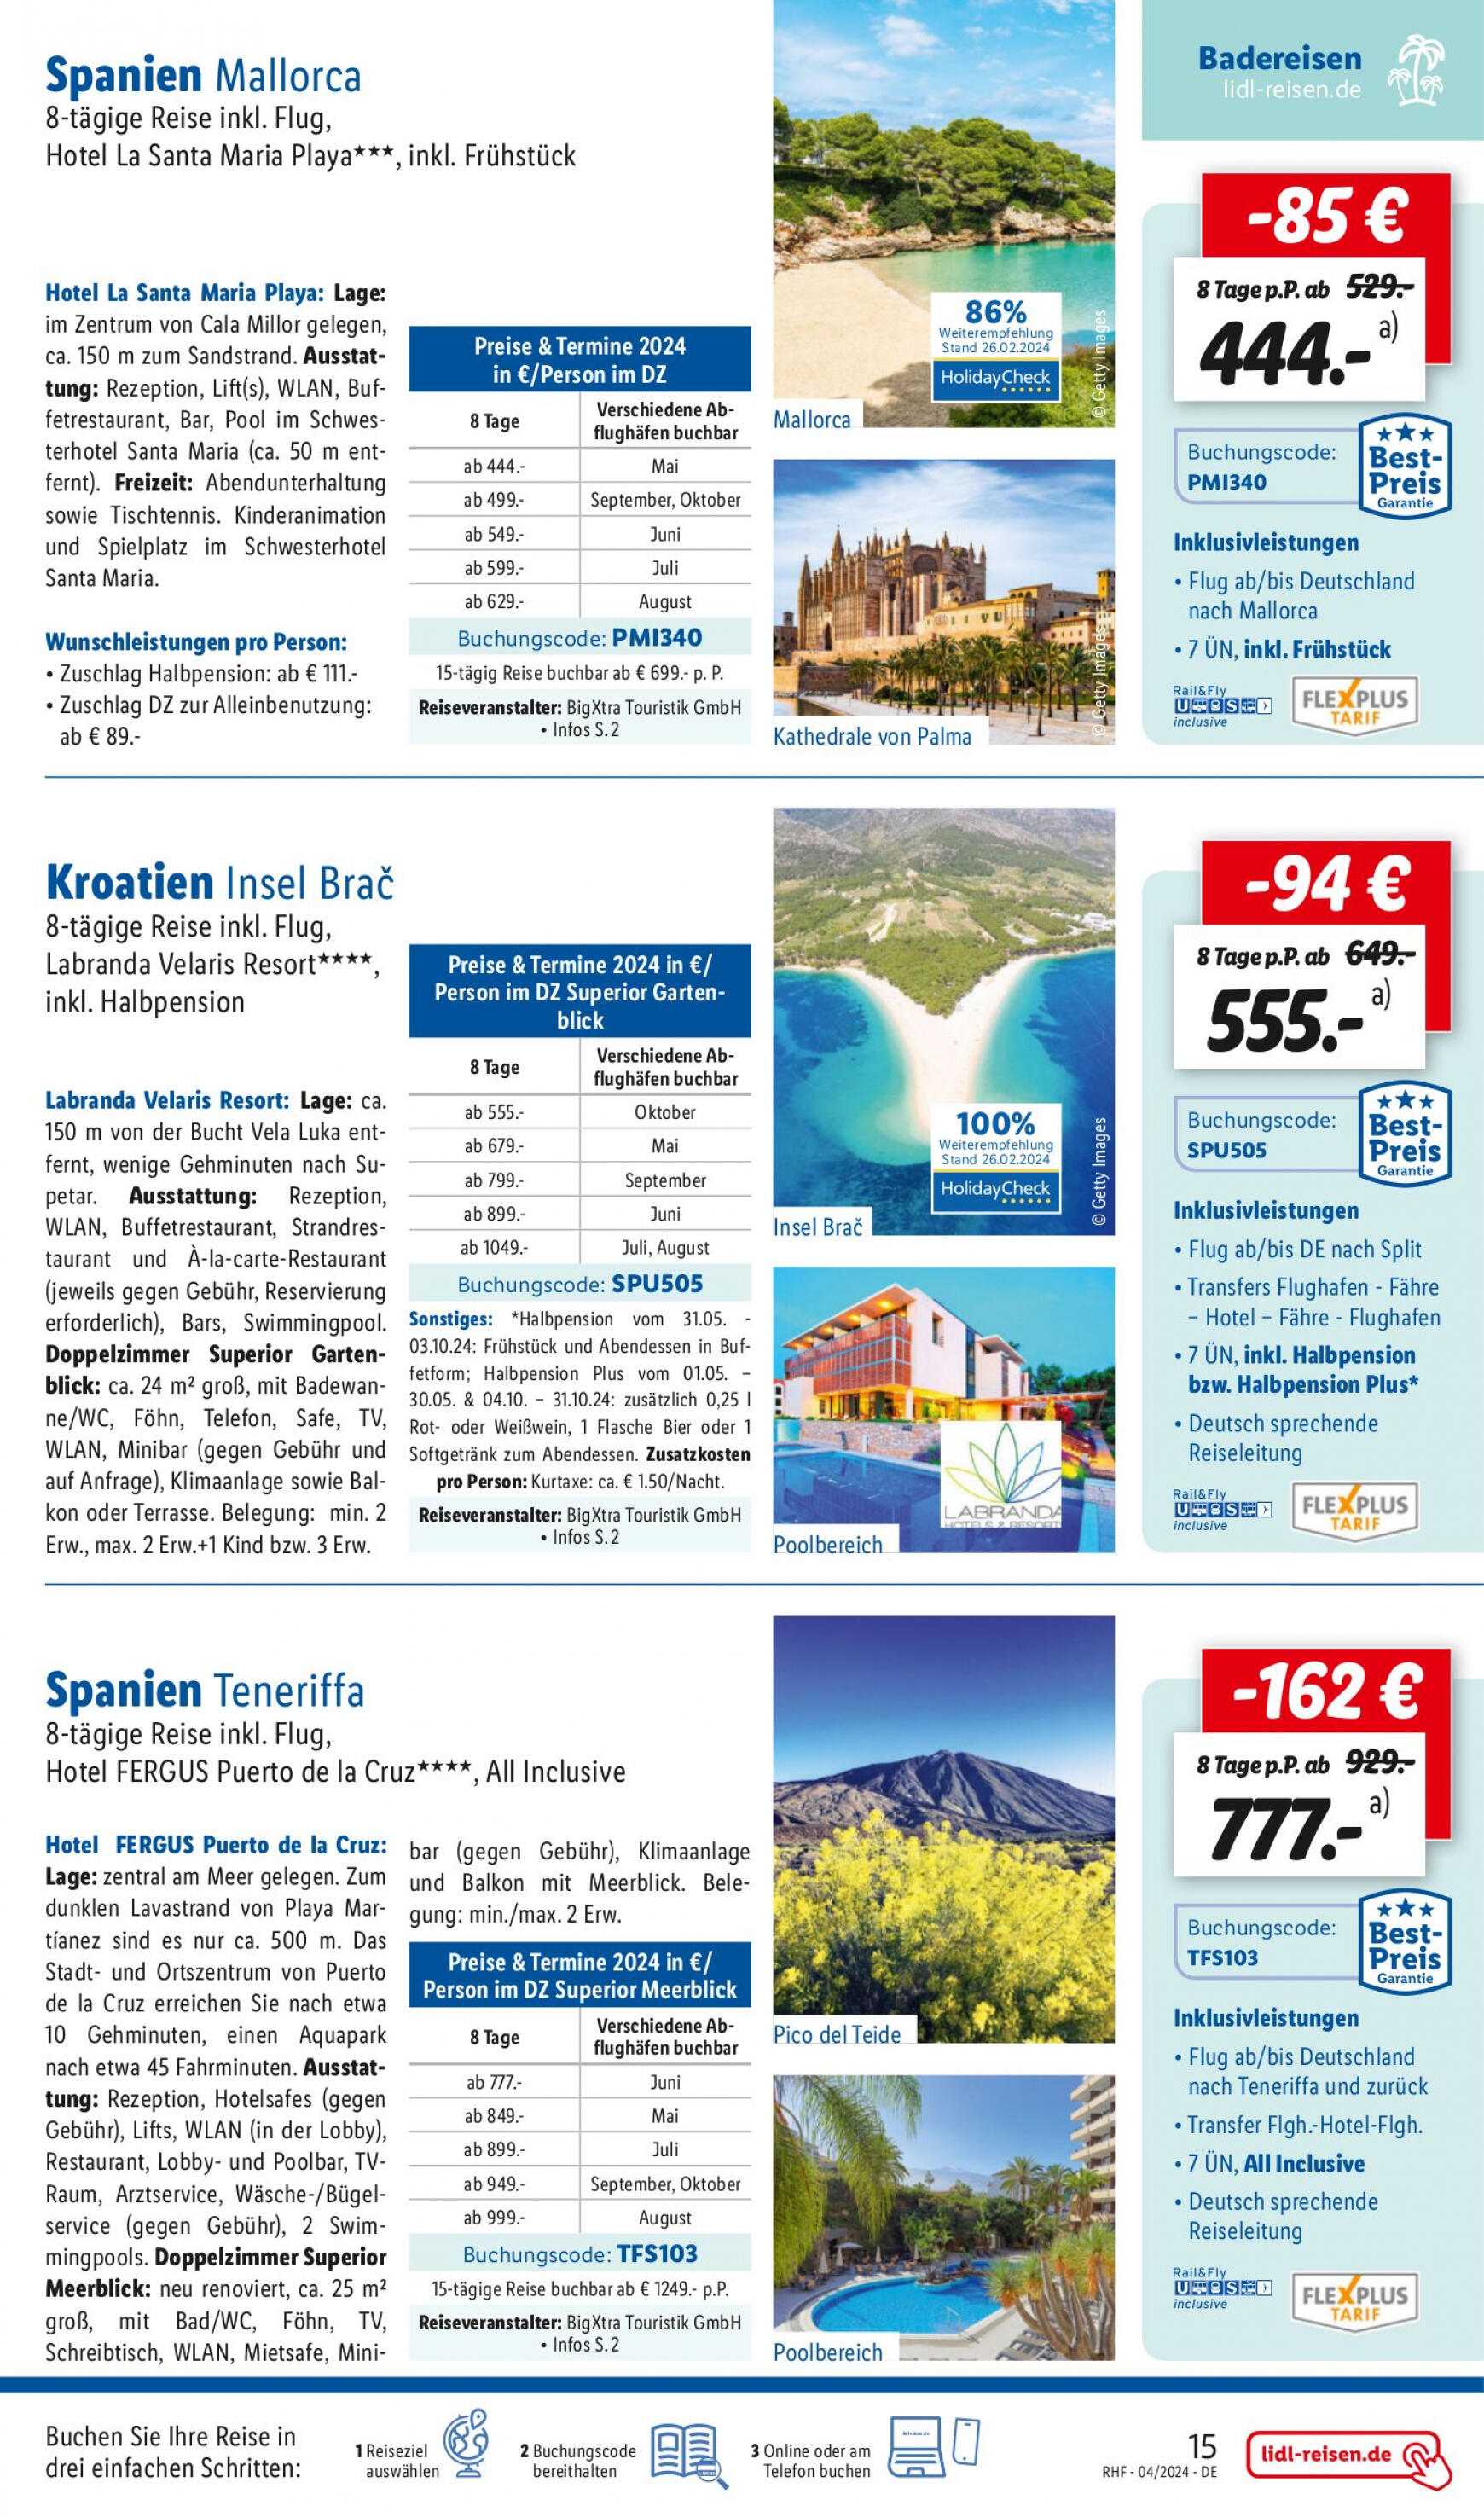 lidl - Flyer Lidl - April Reise-Highlights aktuell 27.03. - 30.04. - page: 15